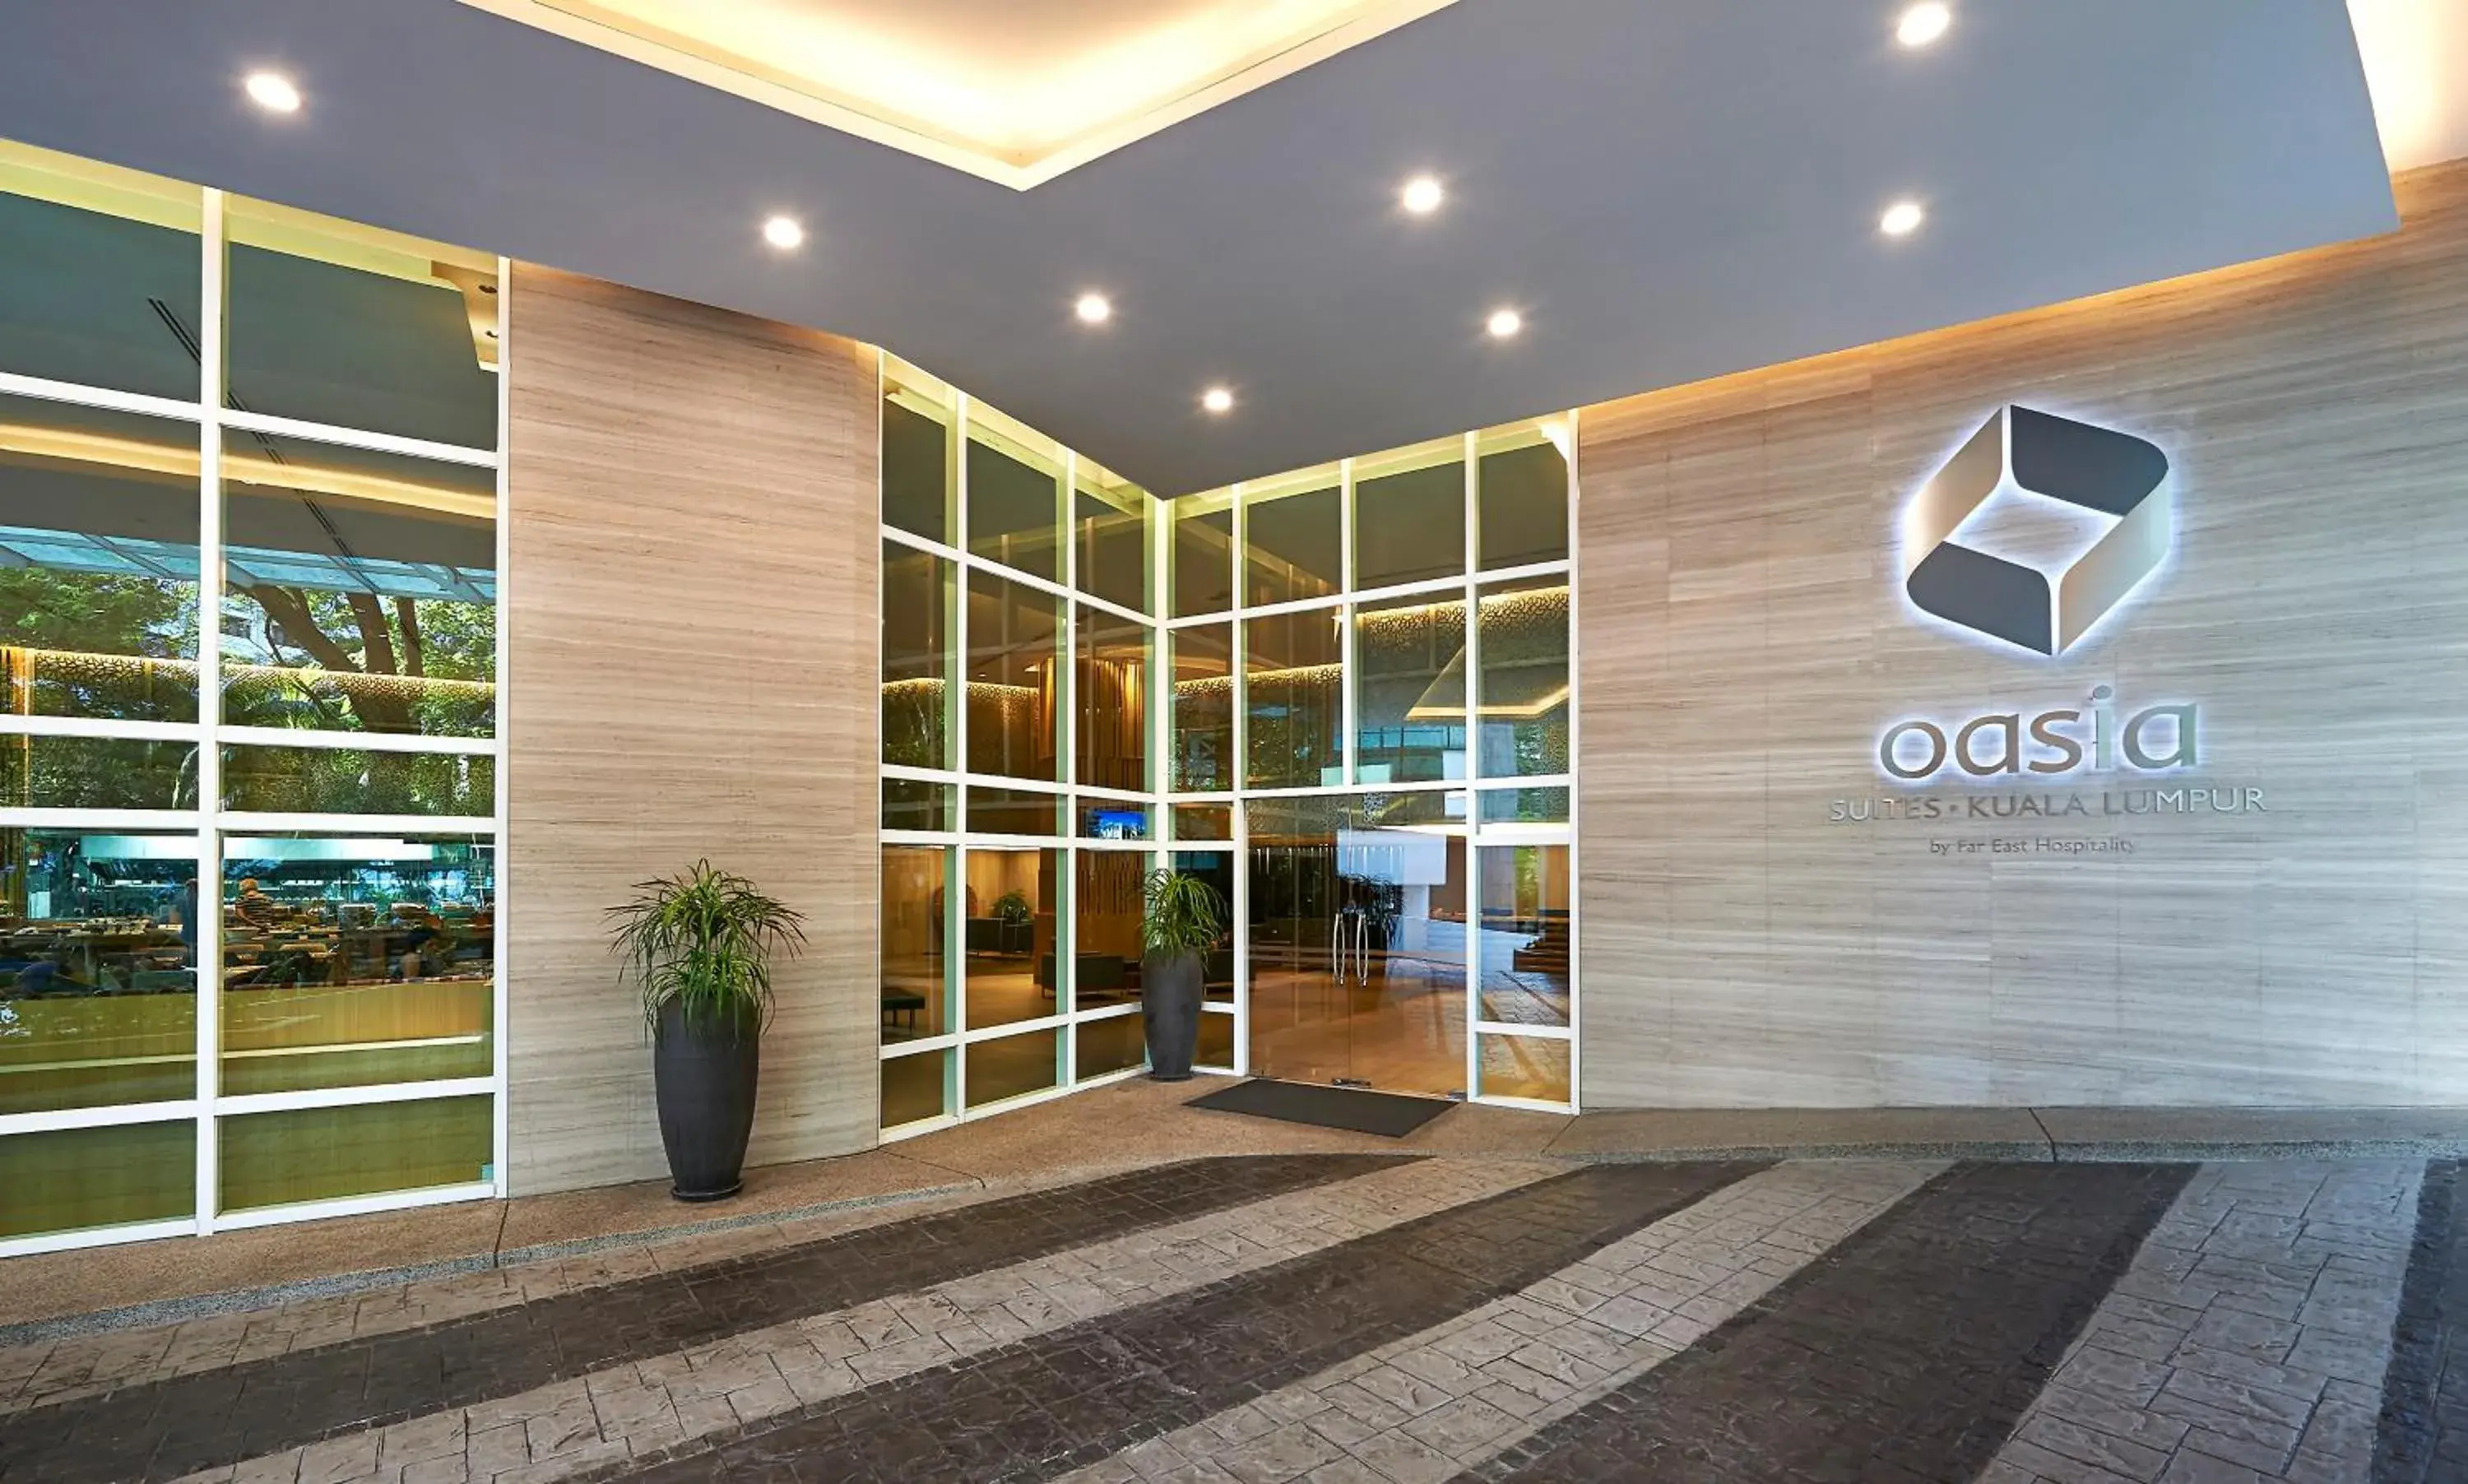 Property building in Oasia Suites Kuala Lumpur by Far East Hospitality